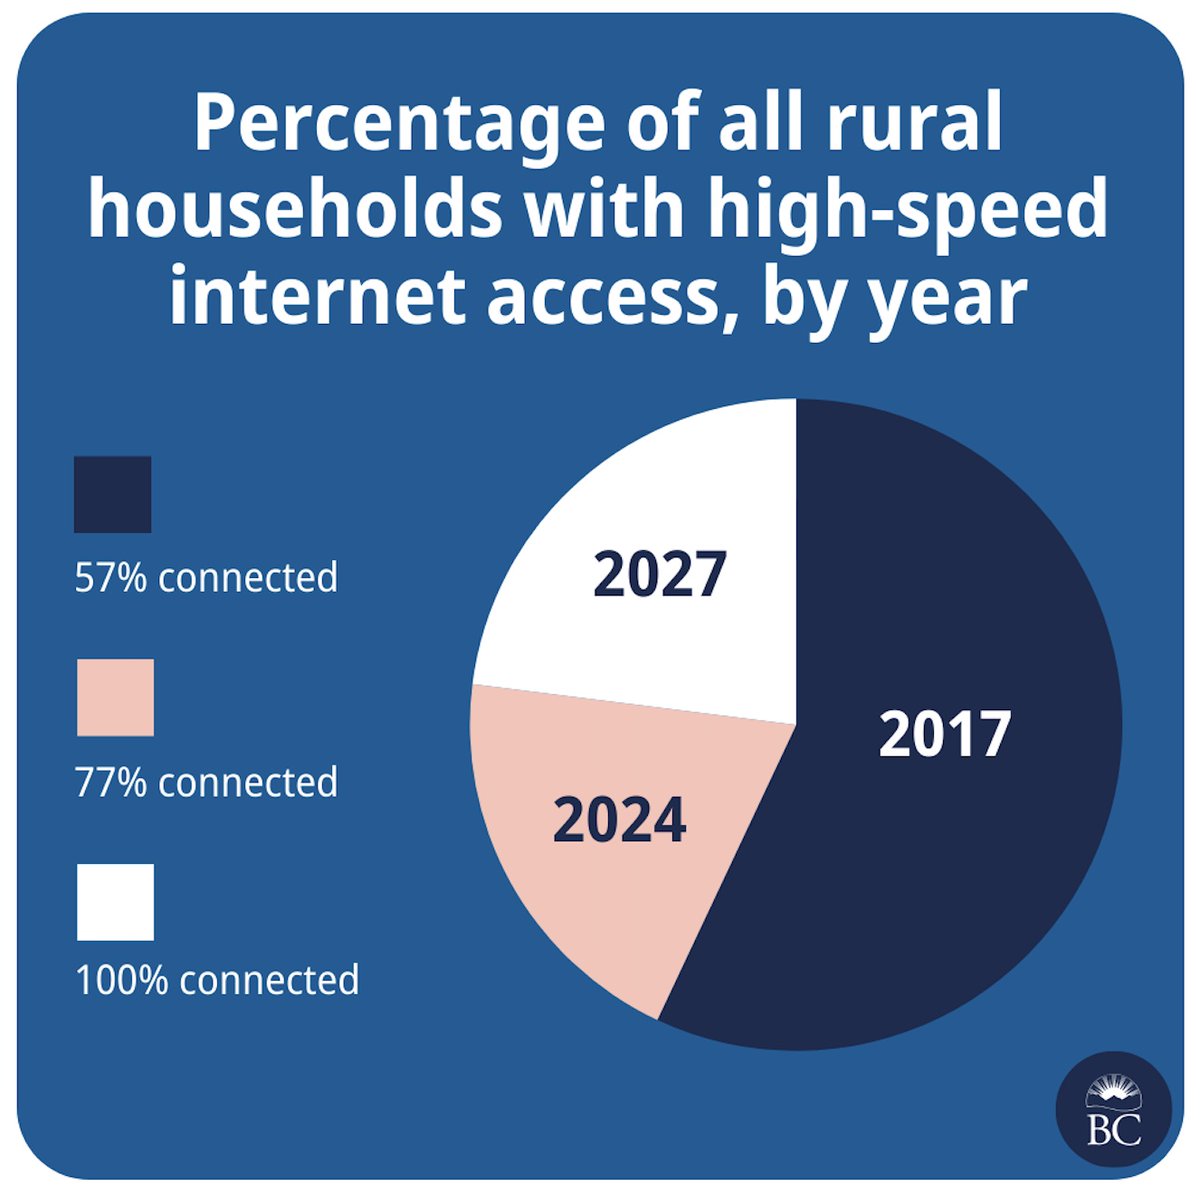 When a graph shows how government is working to help out rural BC. Being connected to reliable, hi-speed internet is essential for work, school and getting access to services. Check it out! #bcpoli